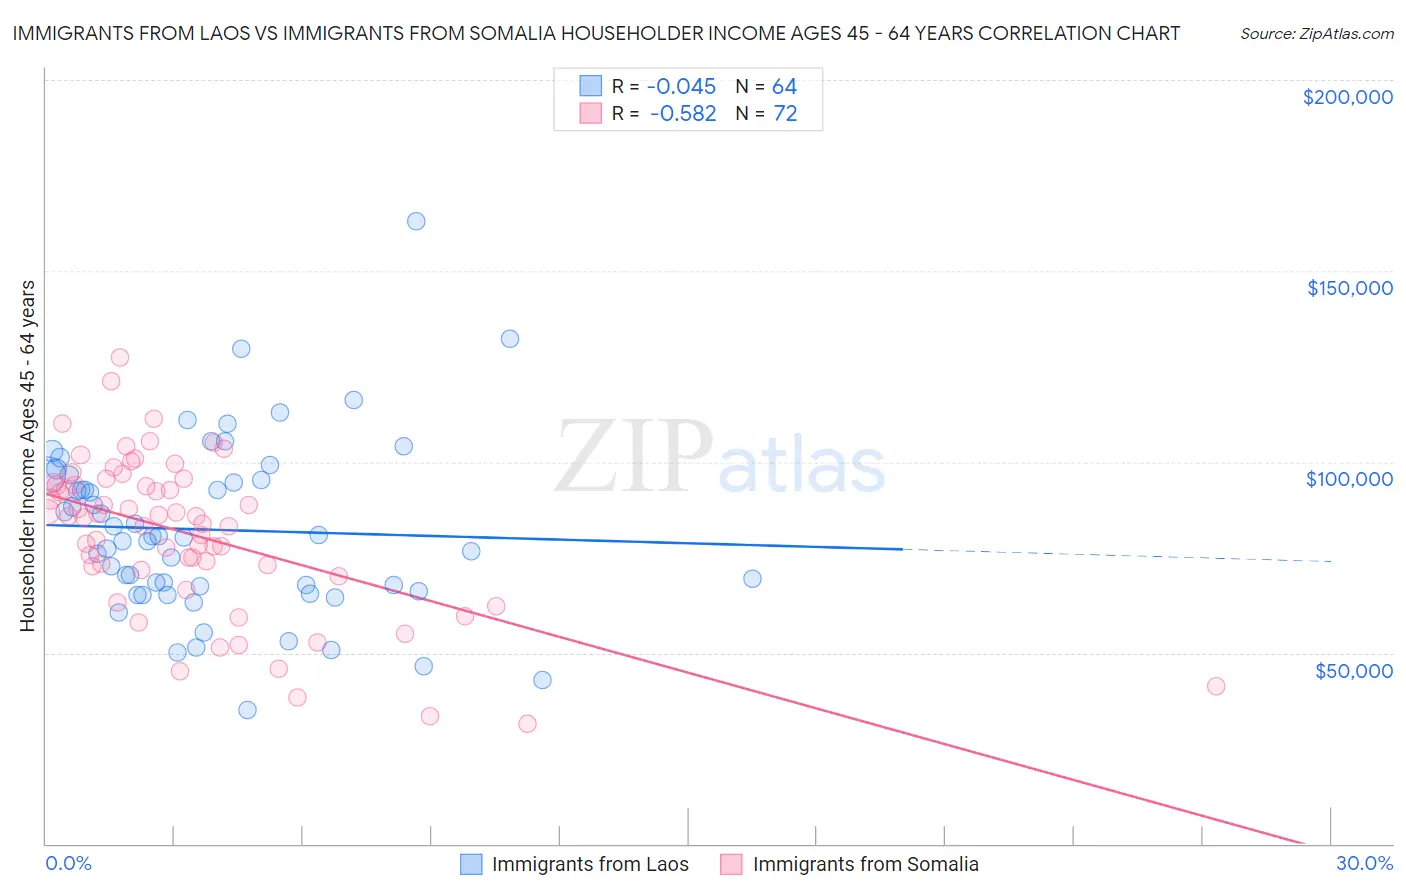 Immigrants from Laos vs Immigrants from Somalia Householder Income Ages 45 - 64 years